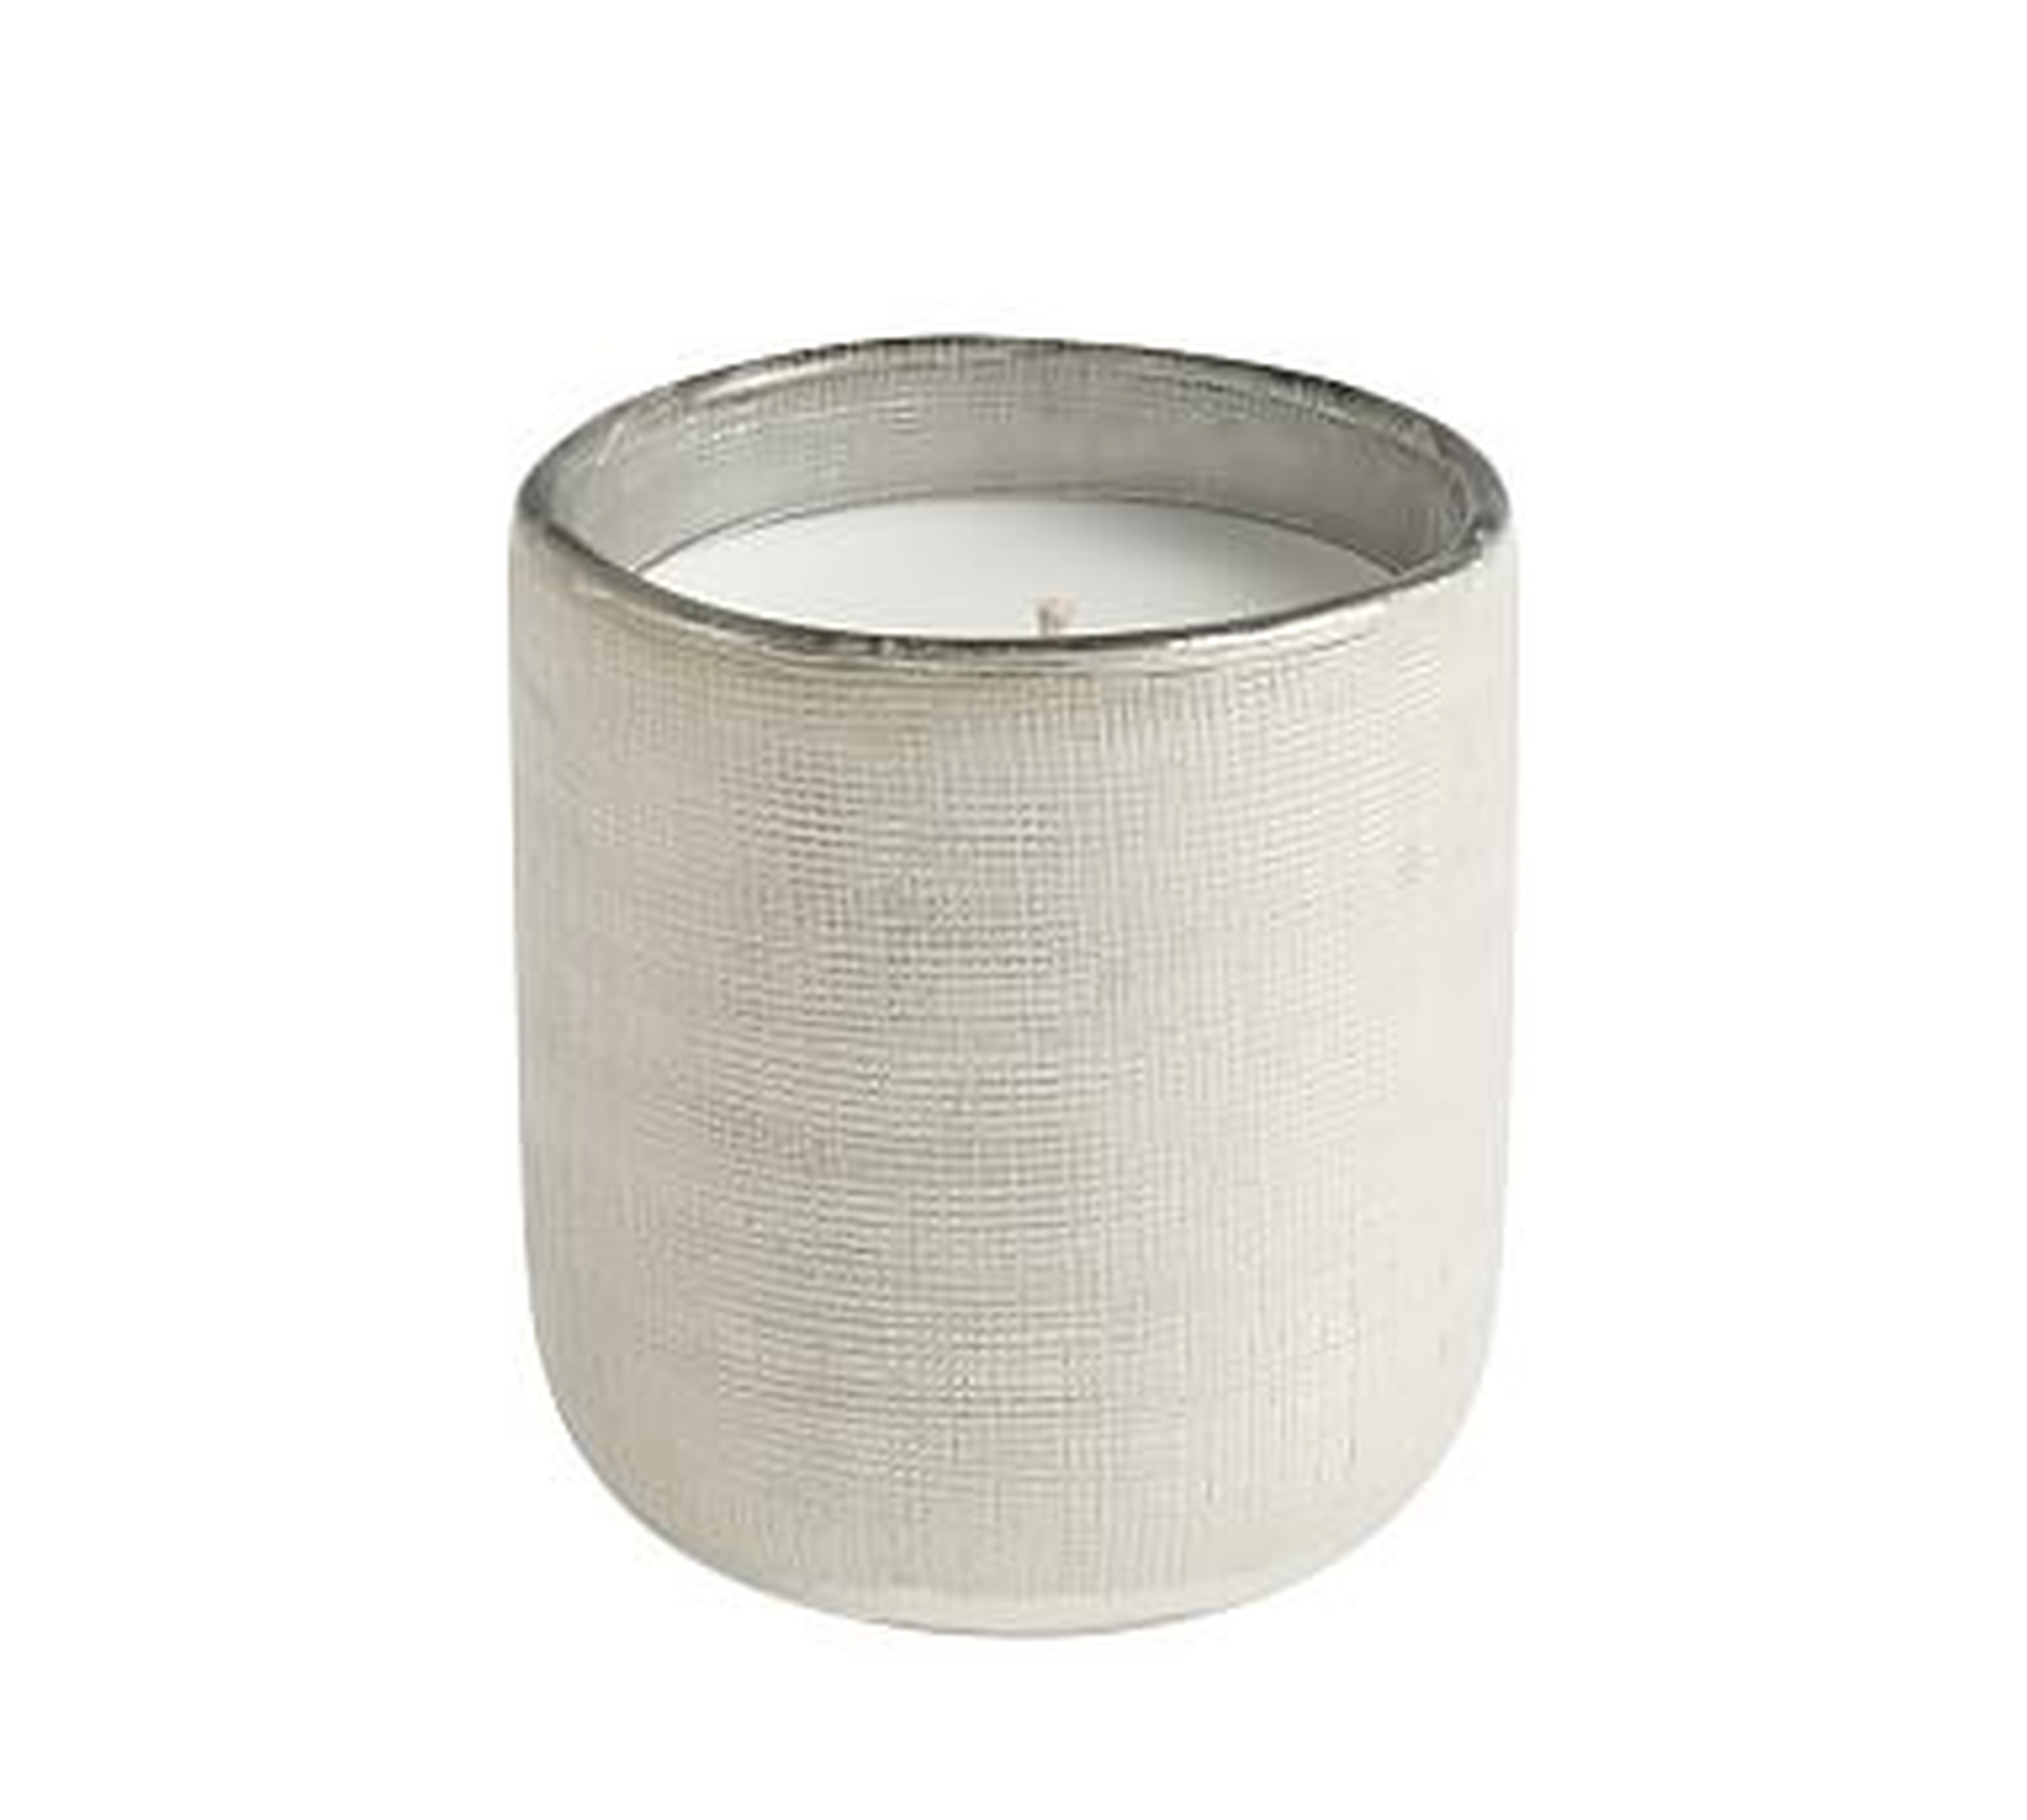 Linen Textured Mercury Glass Scented Candle, Silver, Small, Tuscan Lily - Pottery Barn